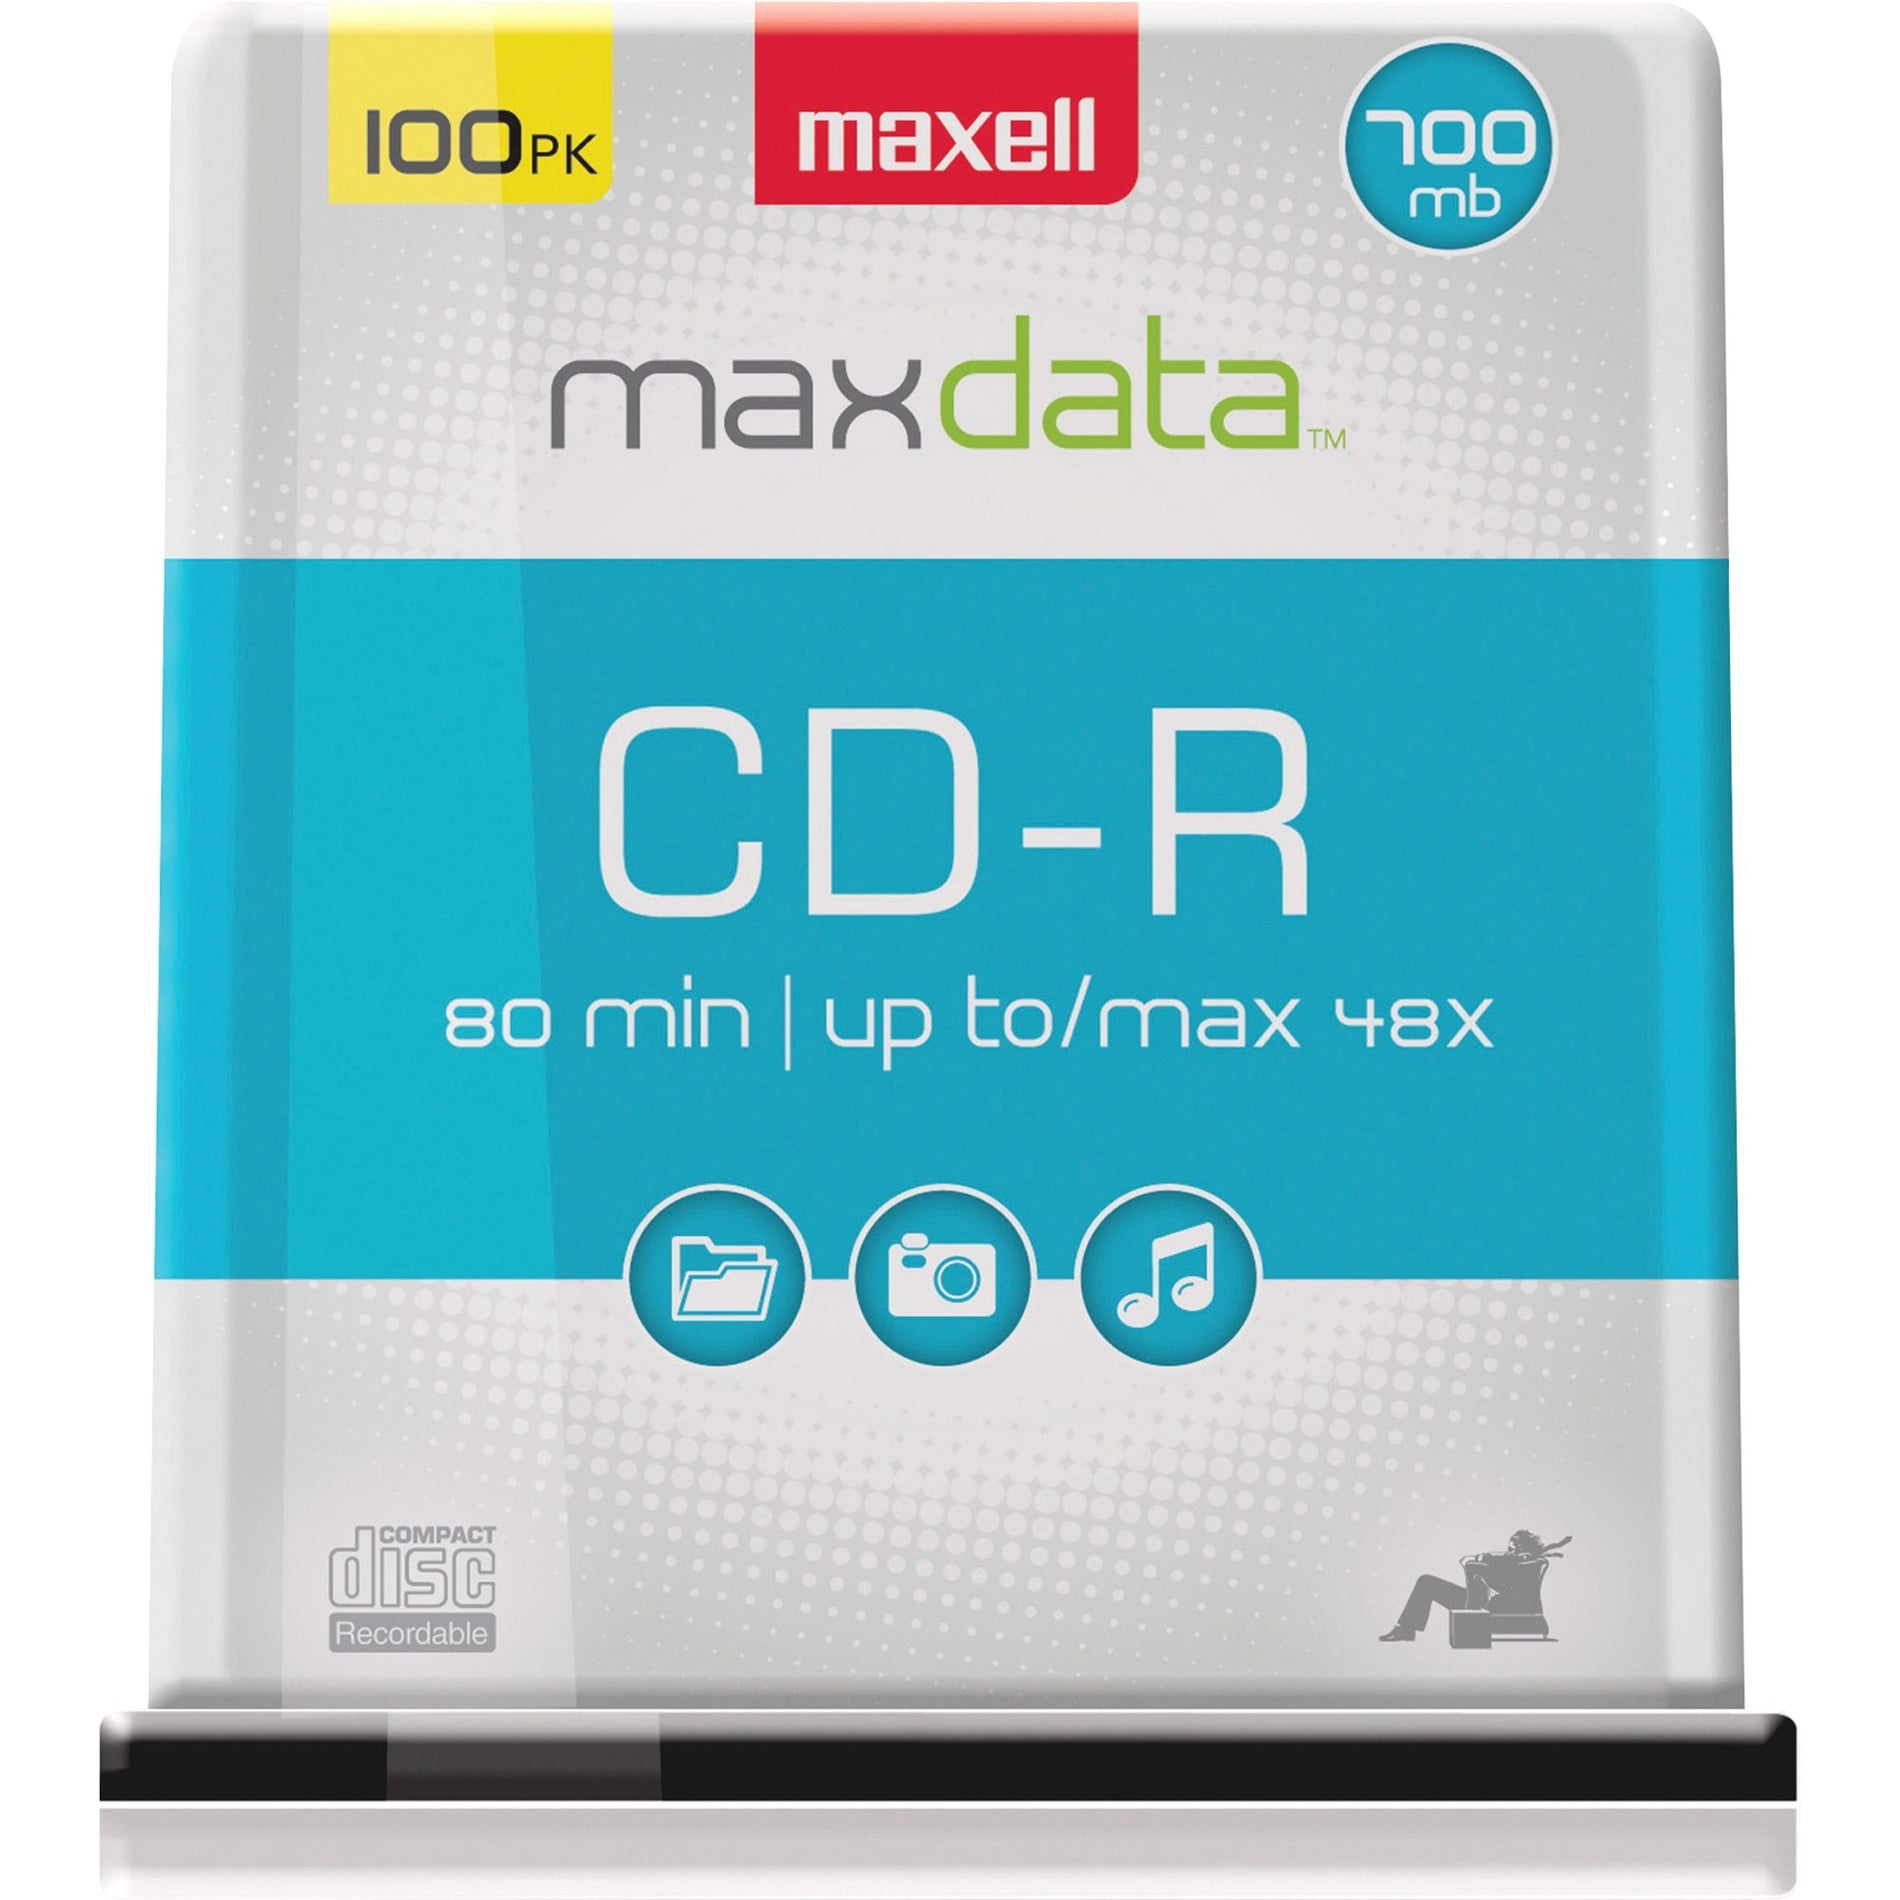 Maxell 648200 Branded Surface CD-R Discs Spindle, 80 Min/700MB, 48X, 100/PK